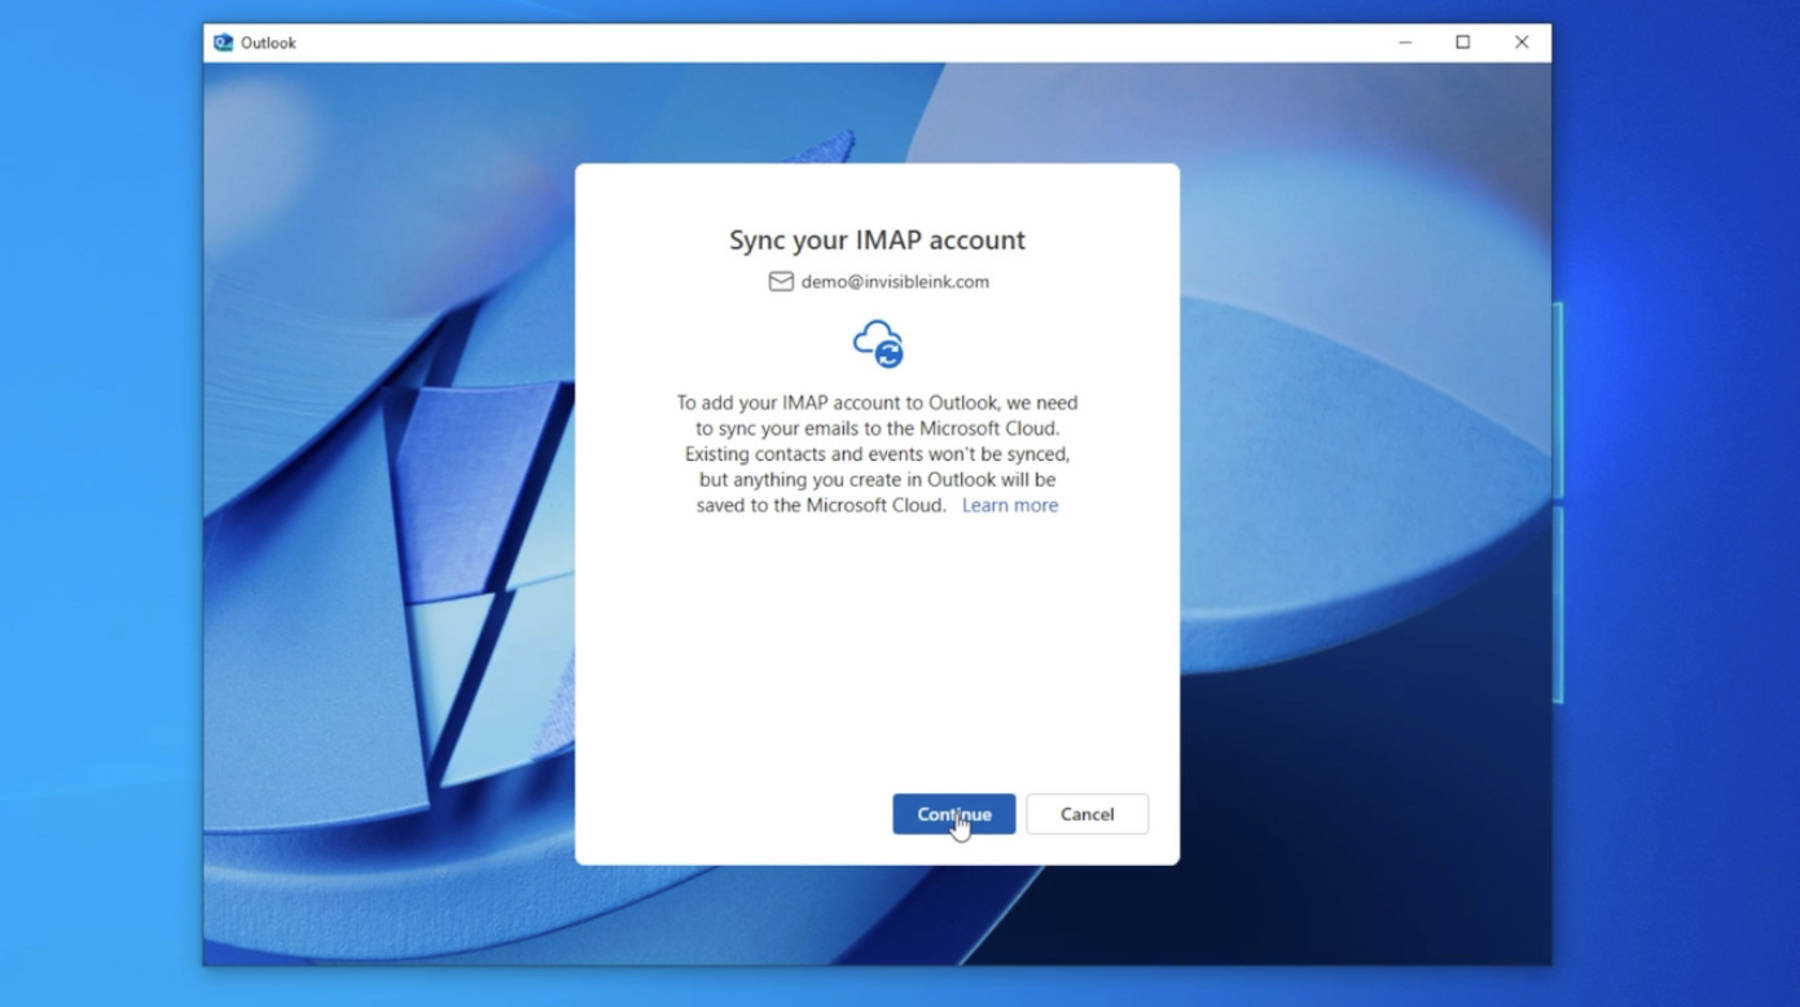 Step 4: Click Continue again to Sync your IMAP account to Microsoft Cloud. This appears to be a required step with New Outlook.